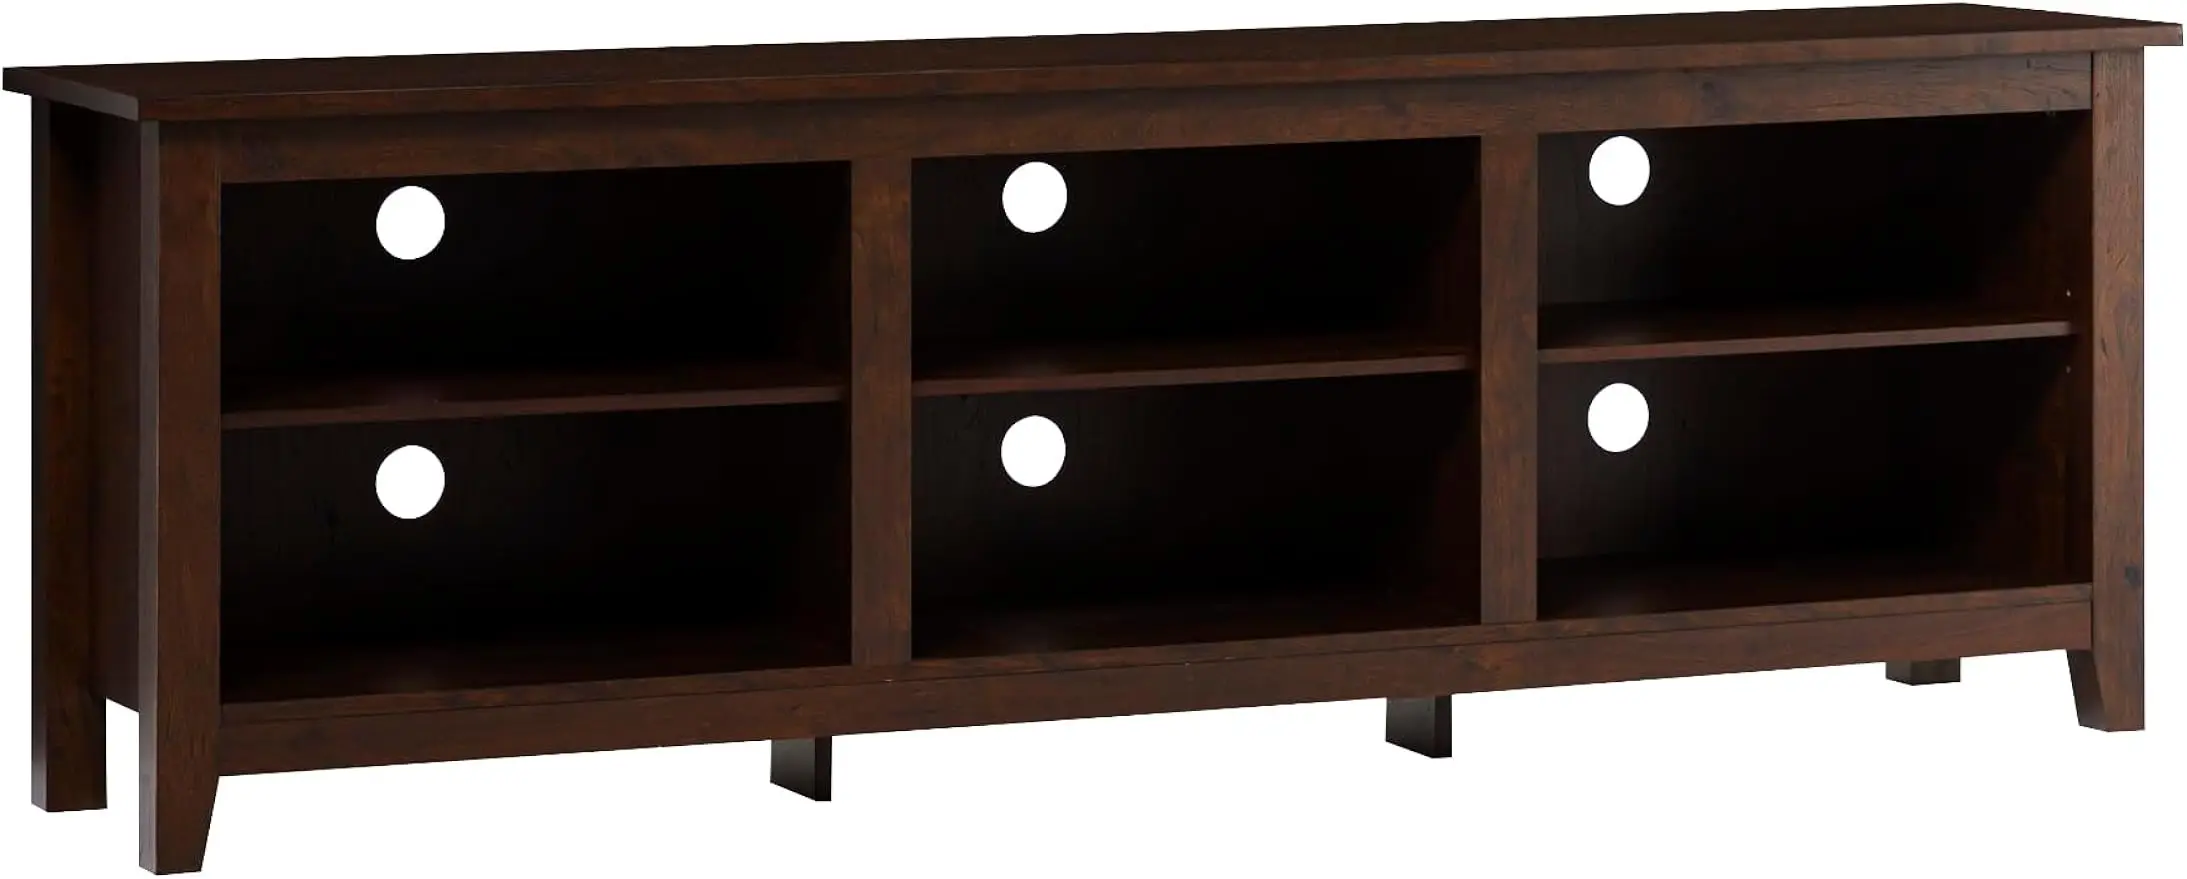 

Walker Edison Wren Classic Brown TV Media Console Entertainment Center for 80 Inch Television with Storage Cubby, 70 Inch